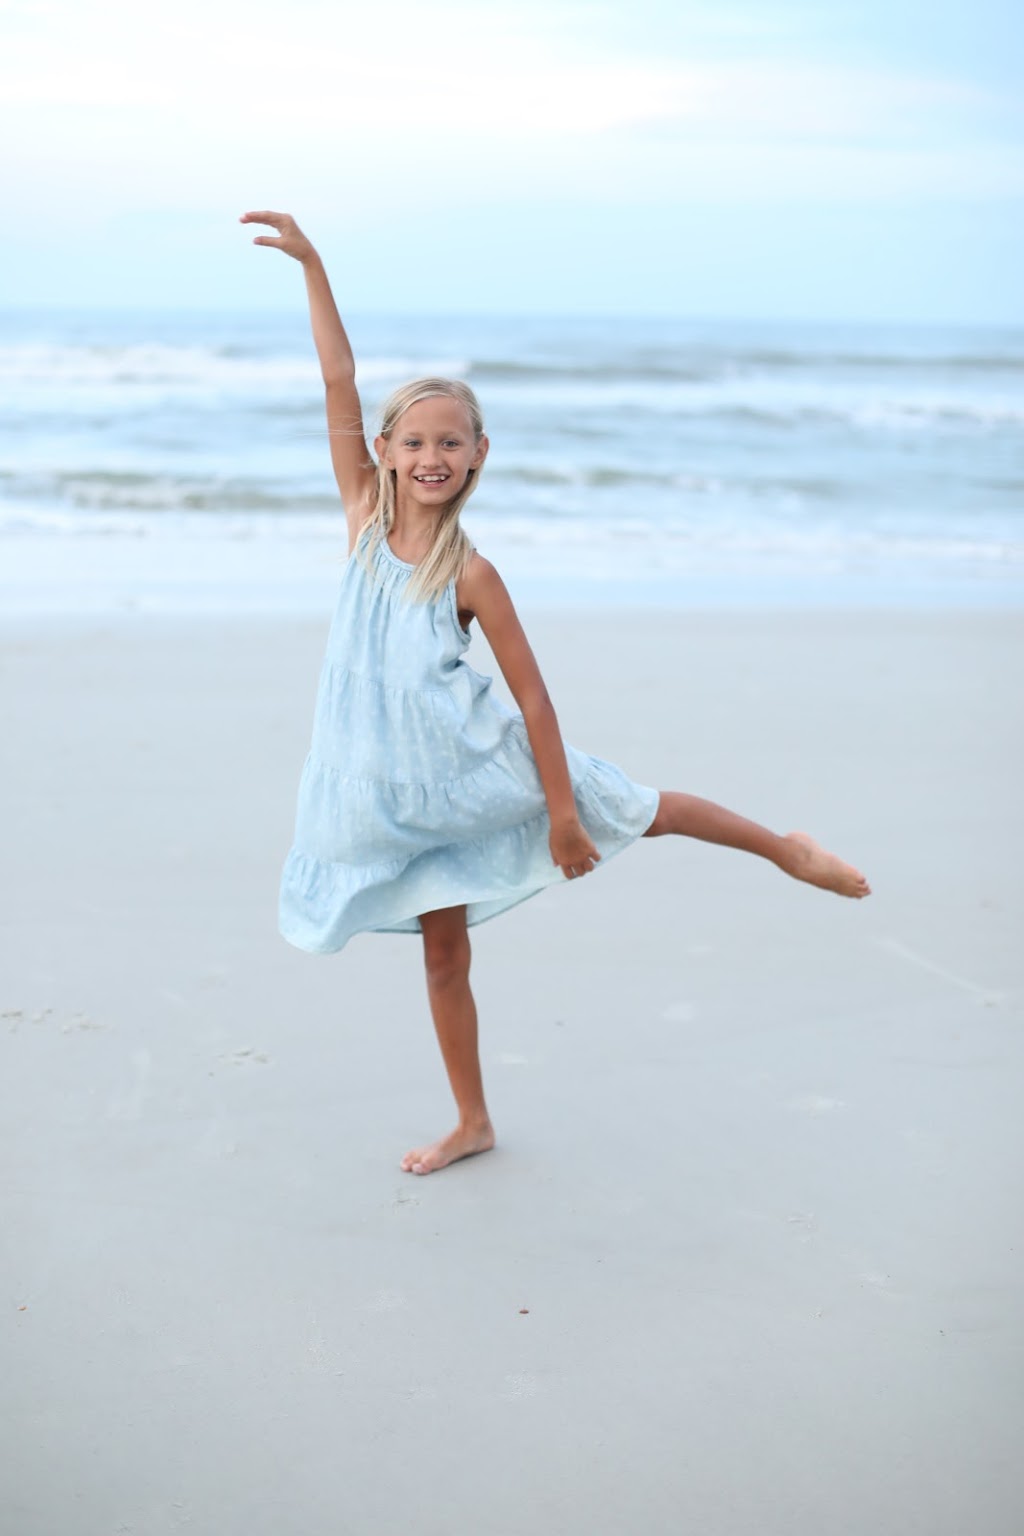 Mark Spivaks Institute and Dance Extension | 774 State Rd 13, Jacksonville, FL 32259 | Phone: (904) 230-7778